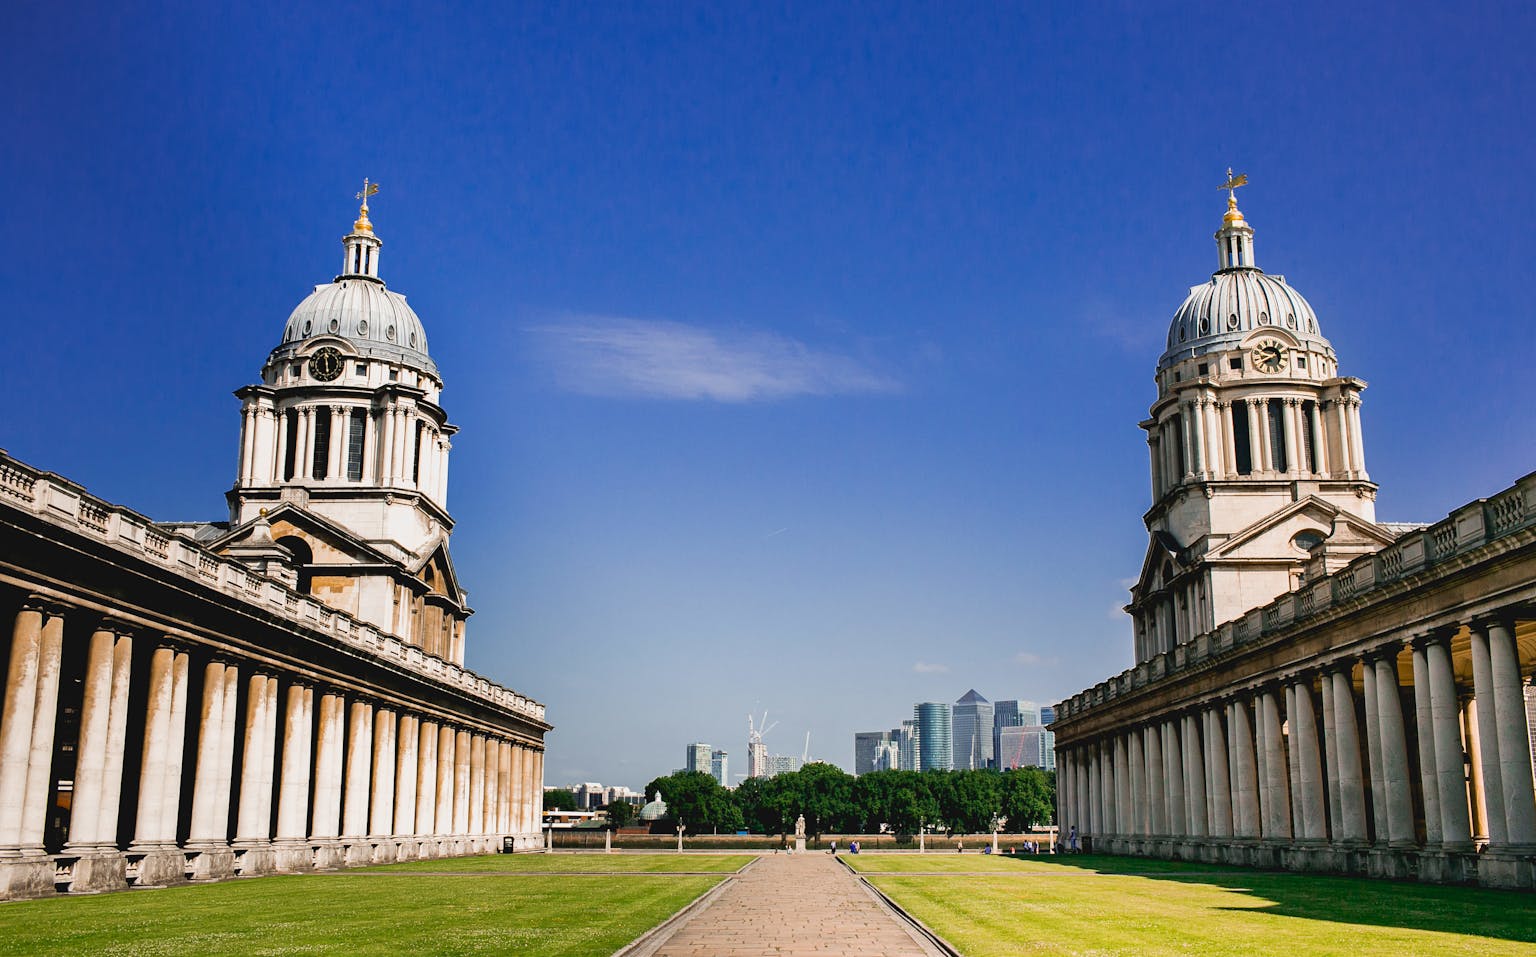 Royal Naval College, Greenwich UNESCO world heritage site